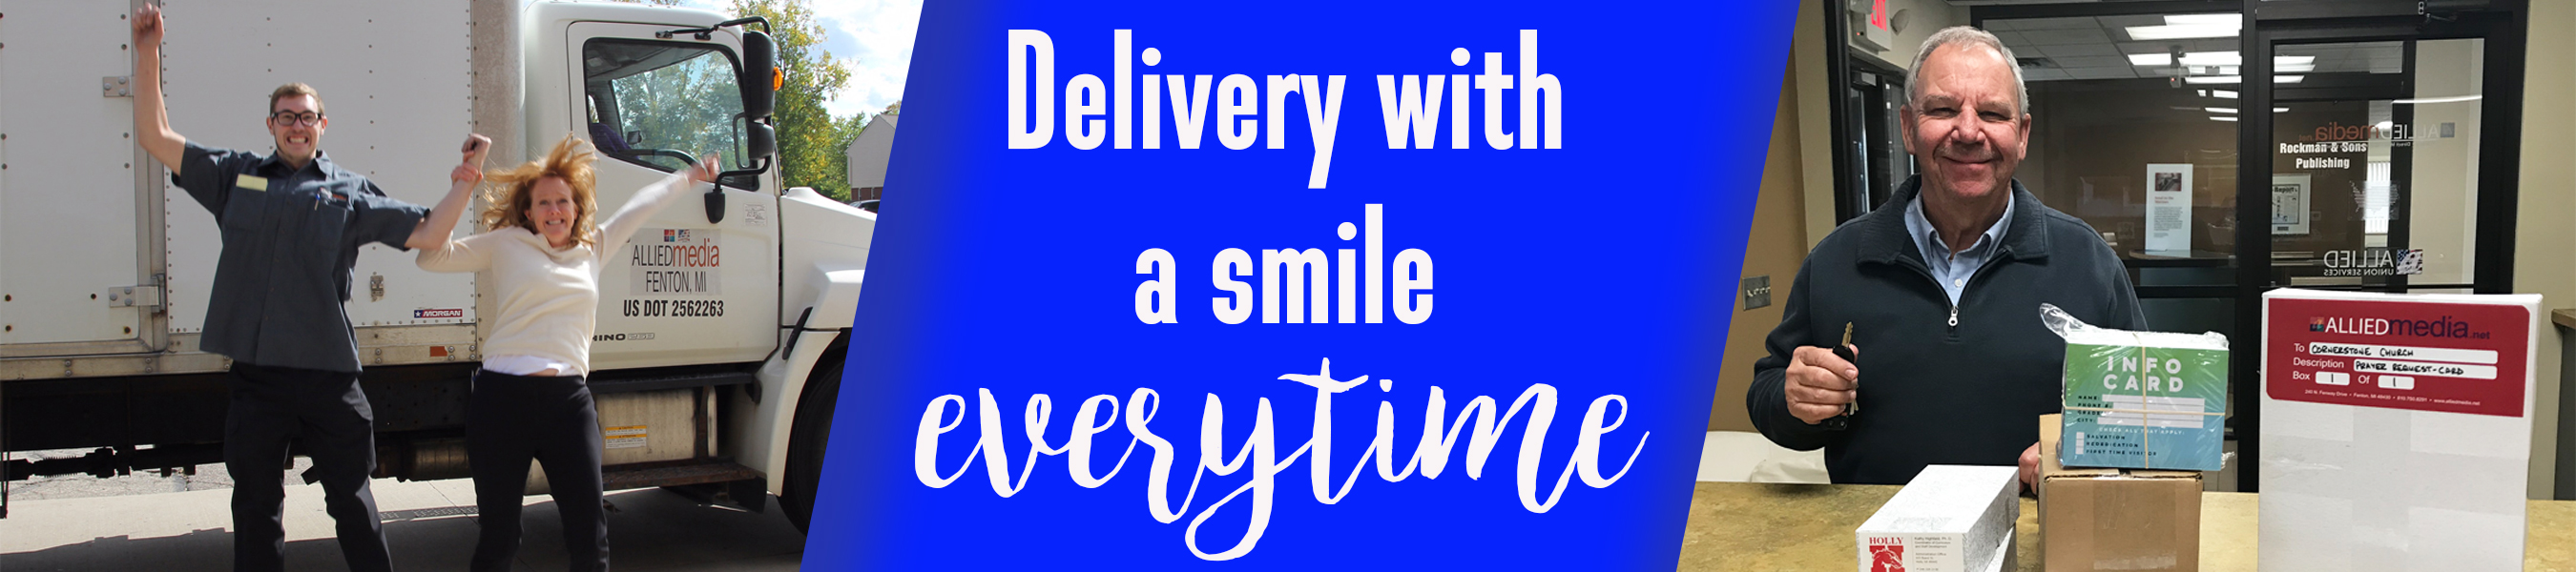 Delivery with a smile everytime